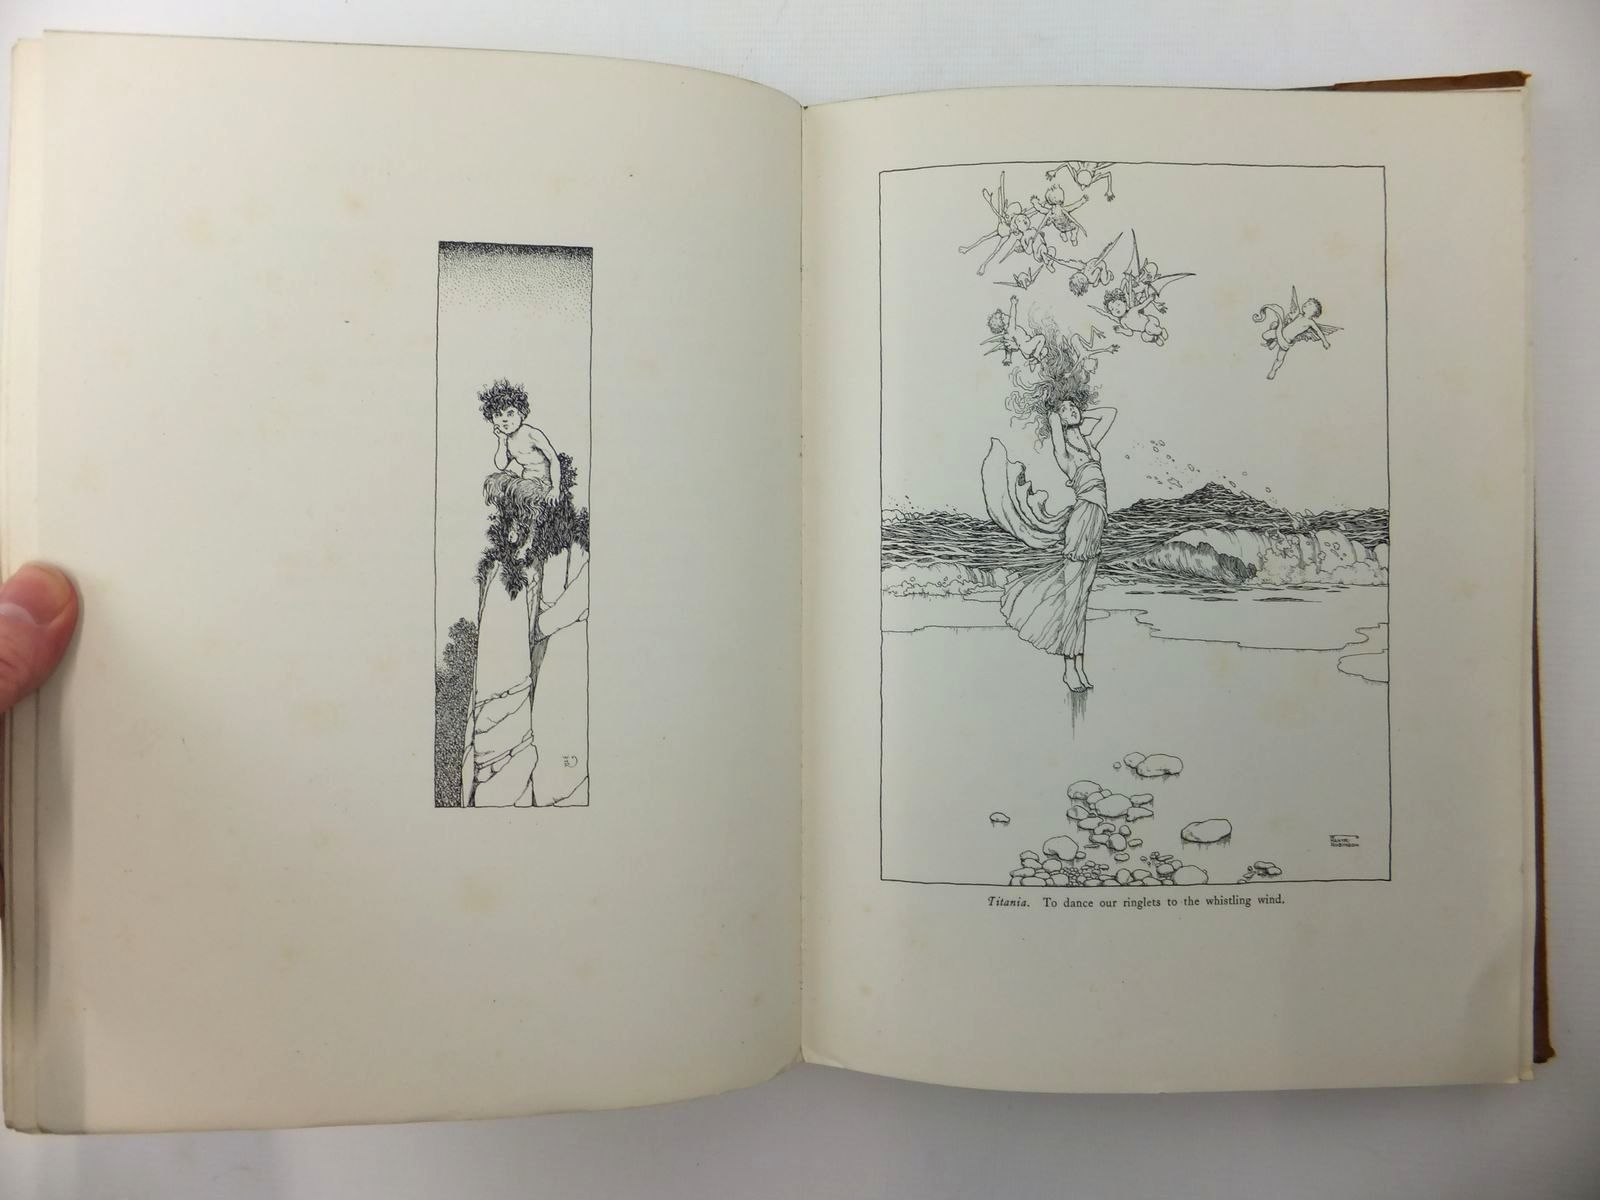 Photo of A MIDSUMMER NIGHTS DREAM written by Shakespeare, William illustrated by Robinson, W. Heath published by Constable and Company Ltd. (STOCK CODE: 2123538)  for sale by Stella & Rose's Books